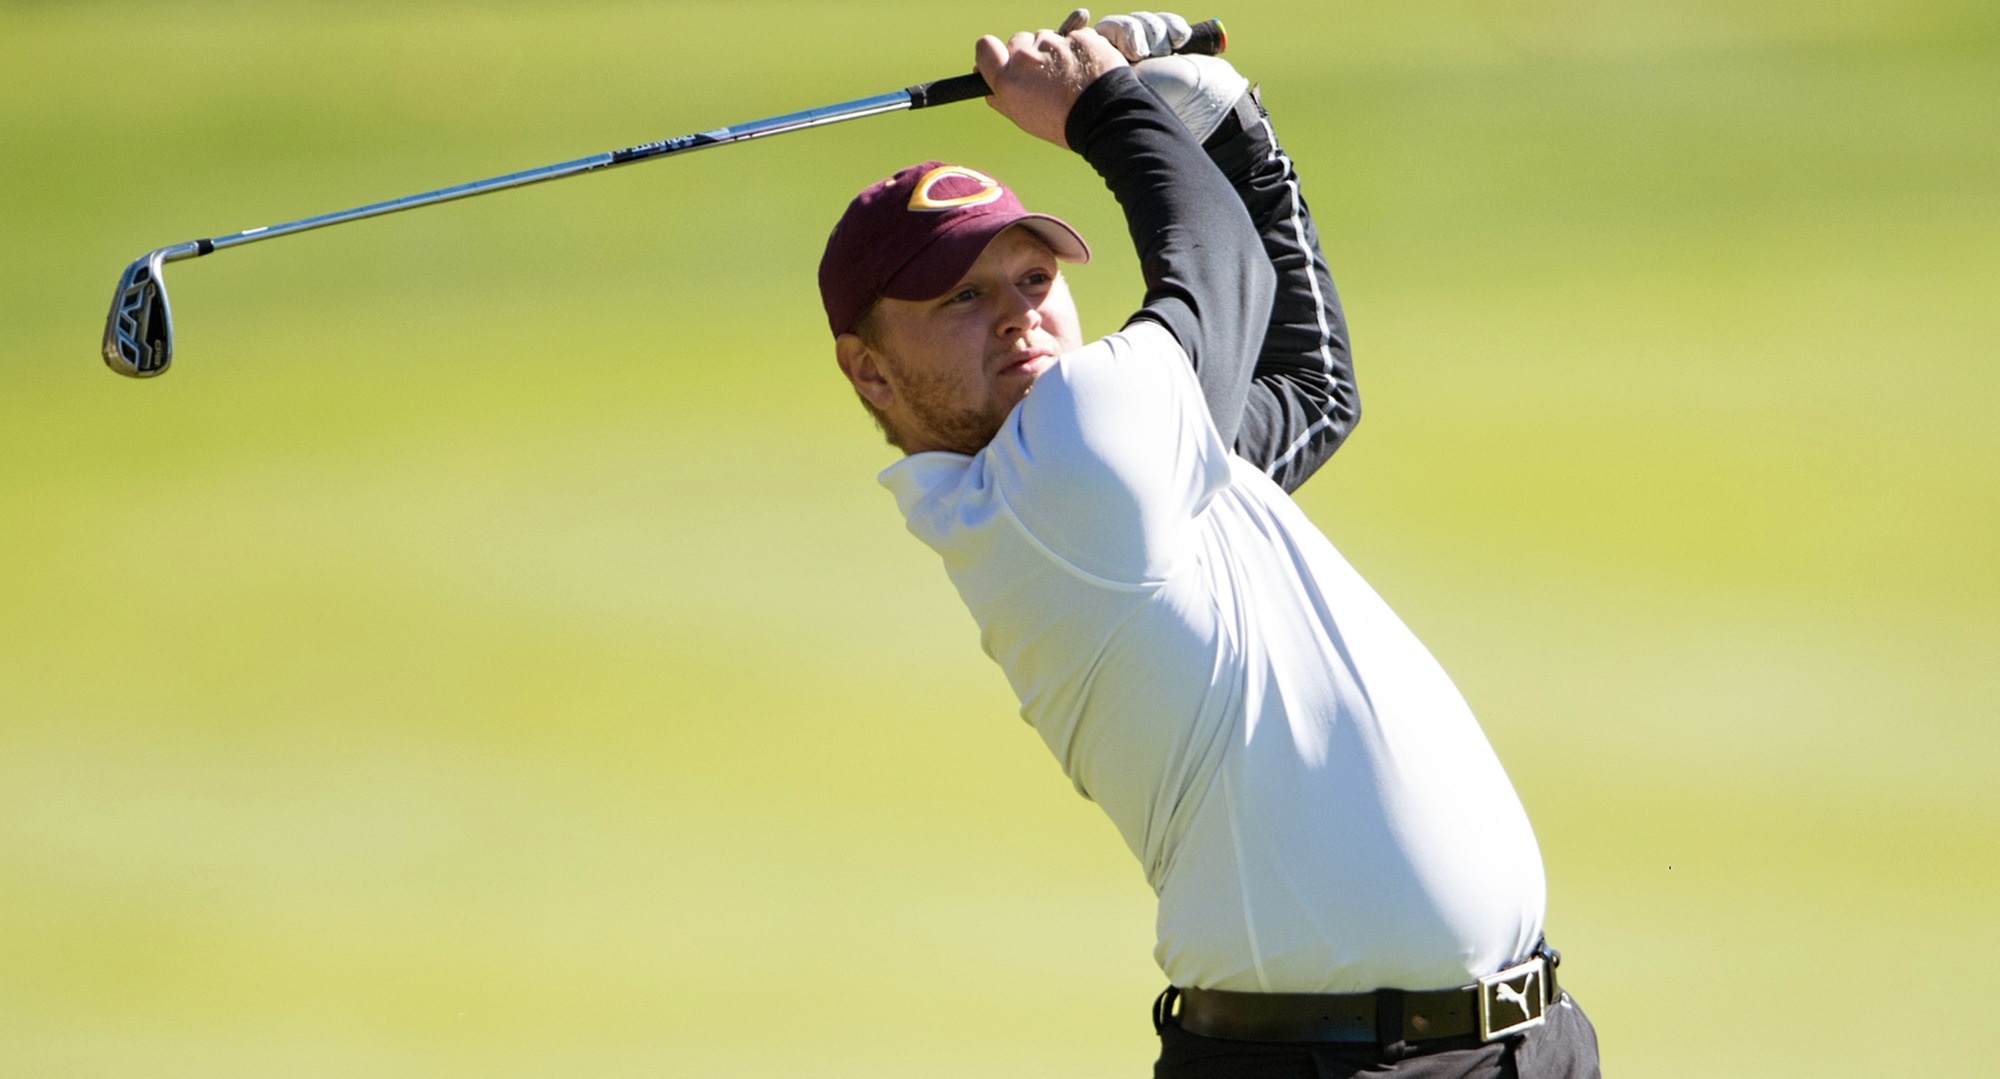 Nathaniel Kahlbaugh led the Cobbers at the spring opener in Missouri as he shot a 73-78 and finished in a tie for 16th place at the NSIC Preview.